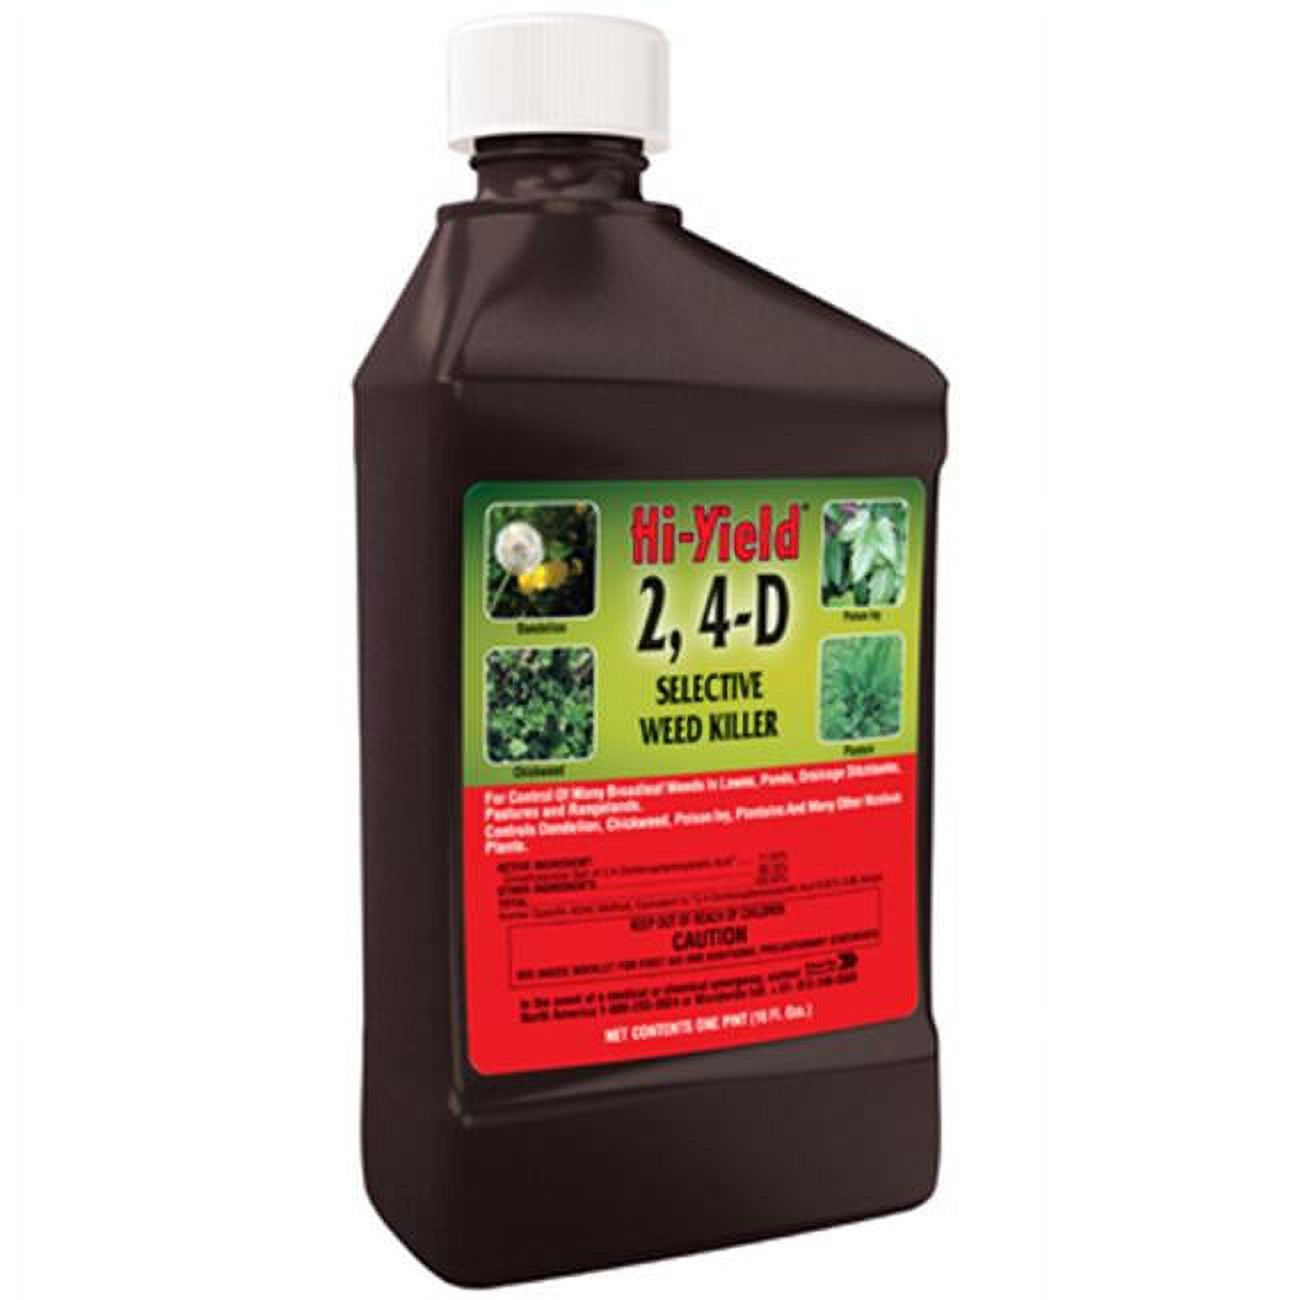 Voluntary Purchasing Group Hi-Yield 21414Selective Weed Killer, 16-Ounce - image 1 of 2